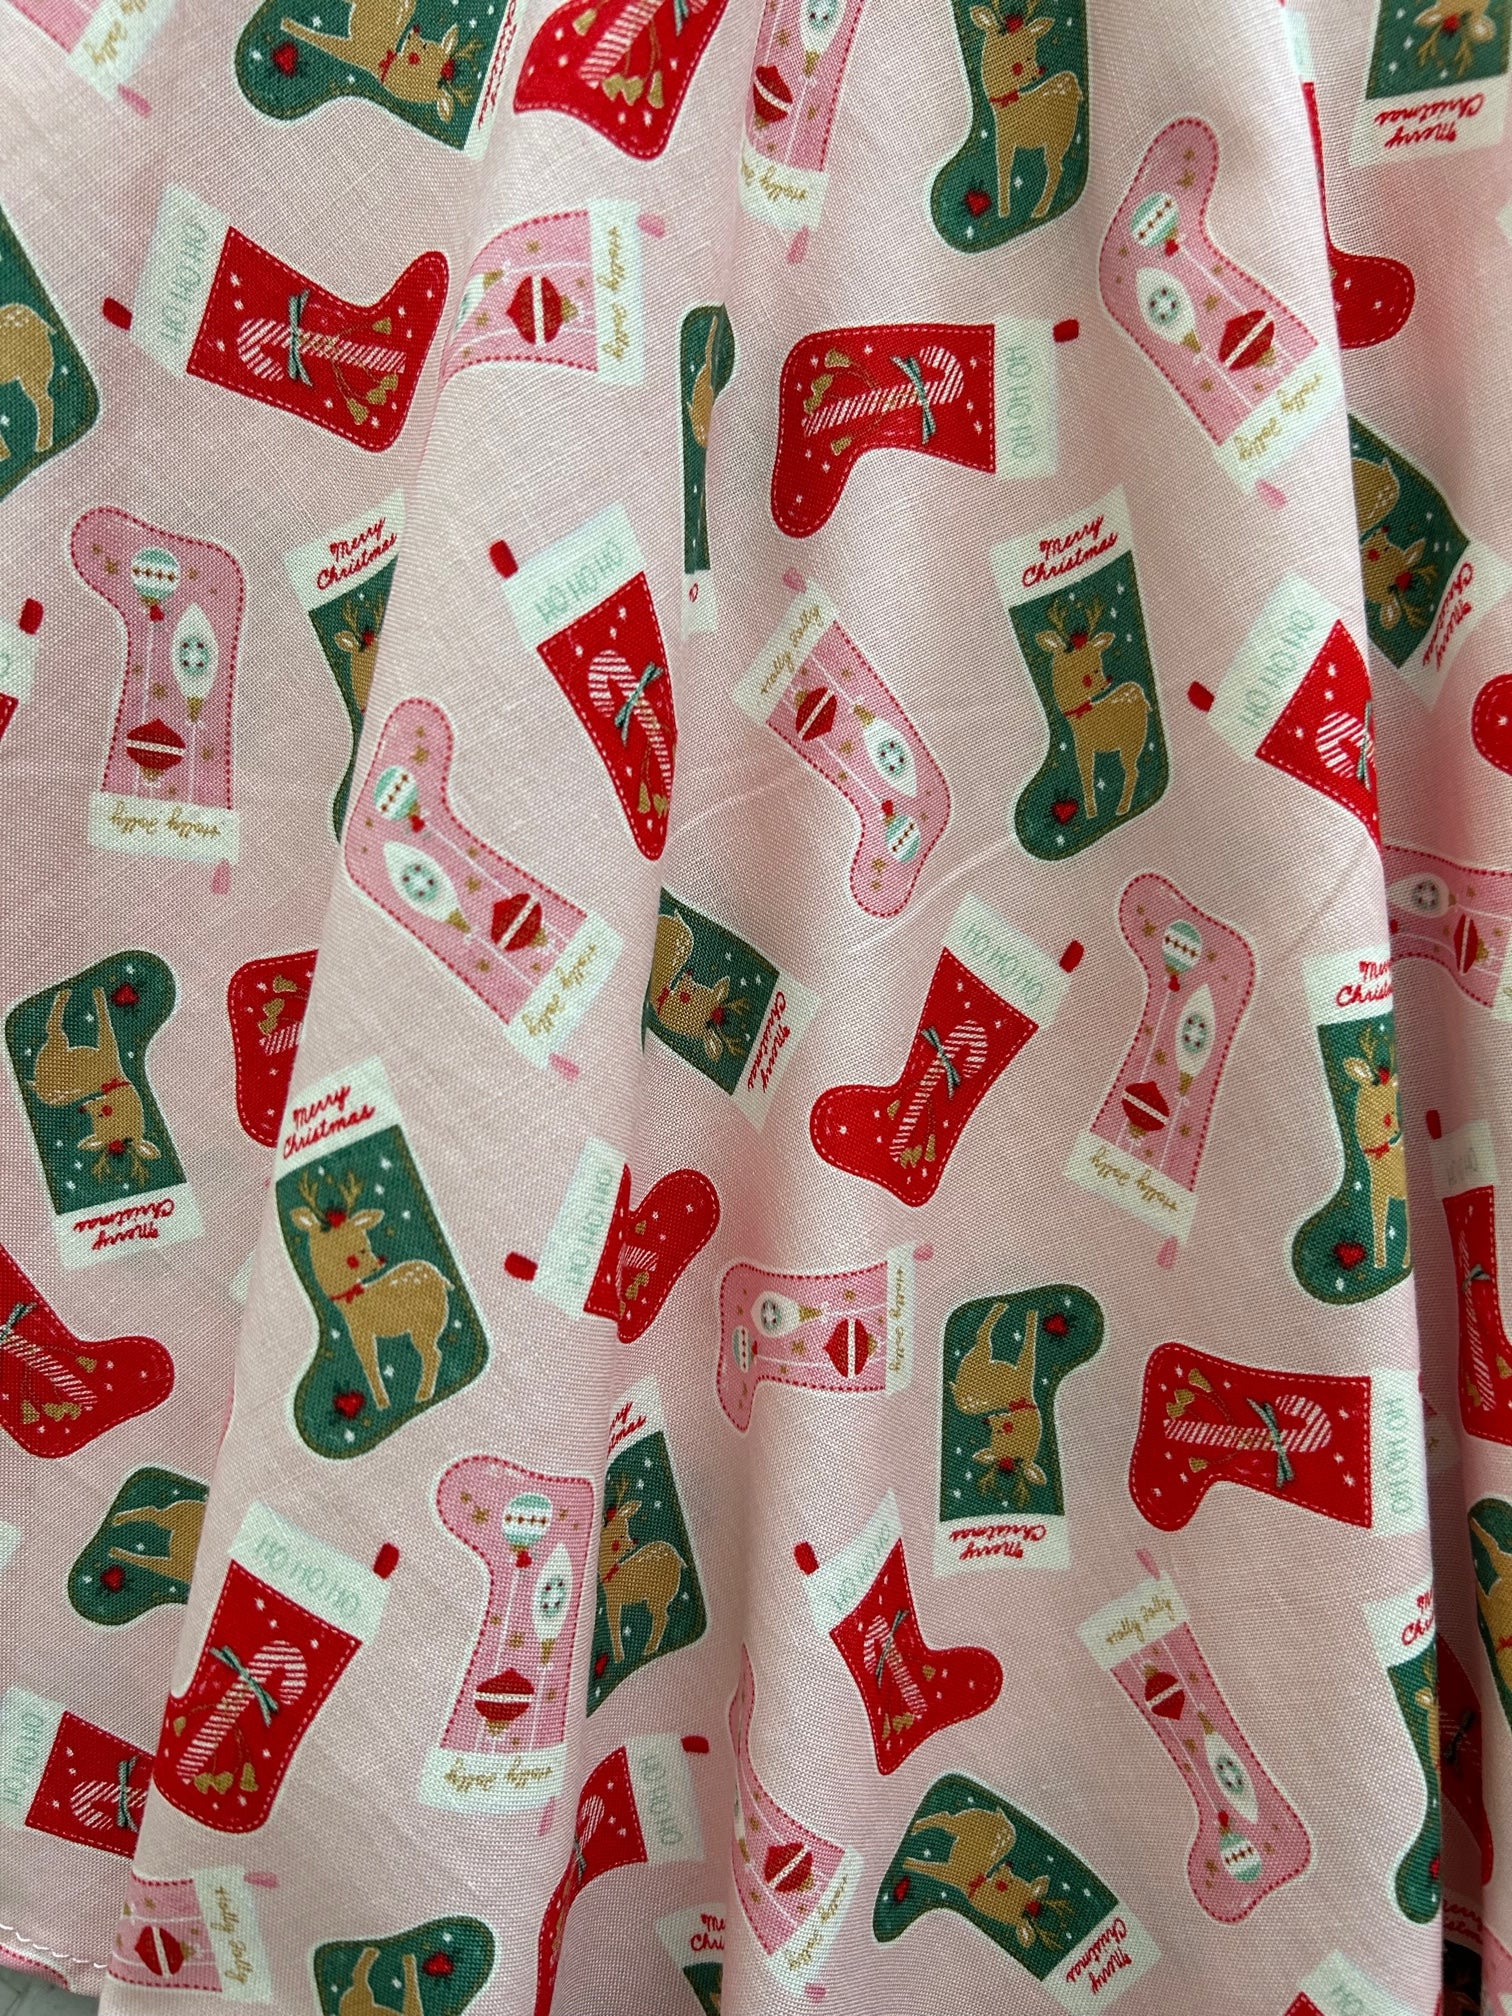 close up of the stockings skater skirt print showing an all over tossed stocking print on pink background